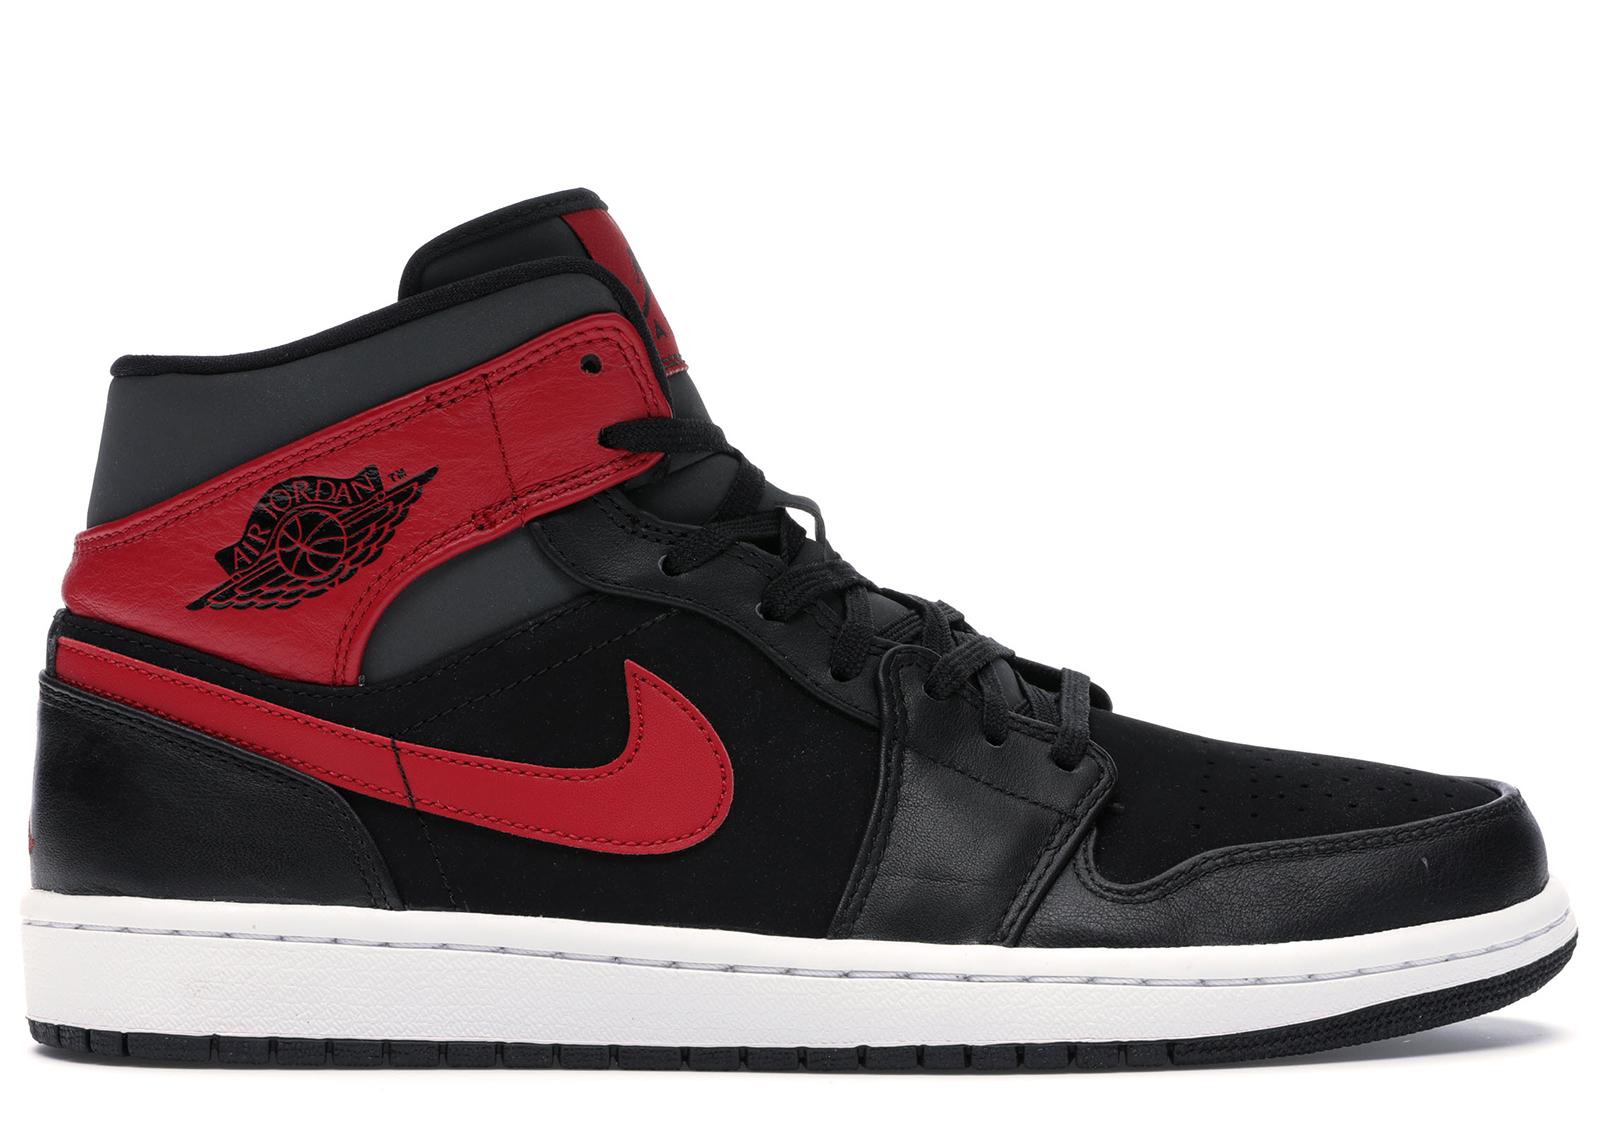 Nike 1 Retro Mid Gym Red in Black for Men - Lyst